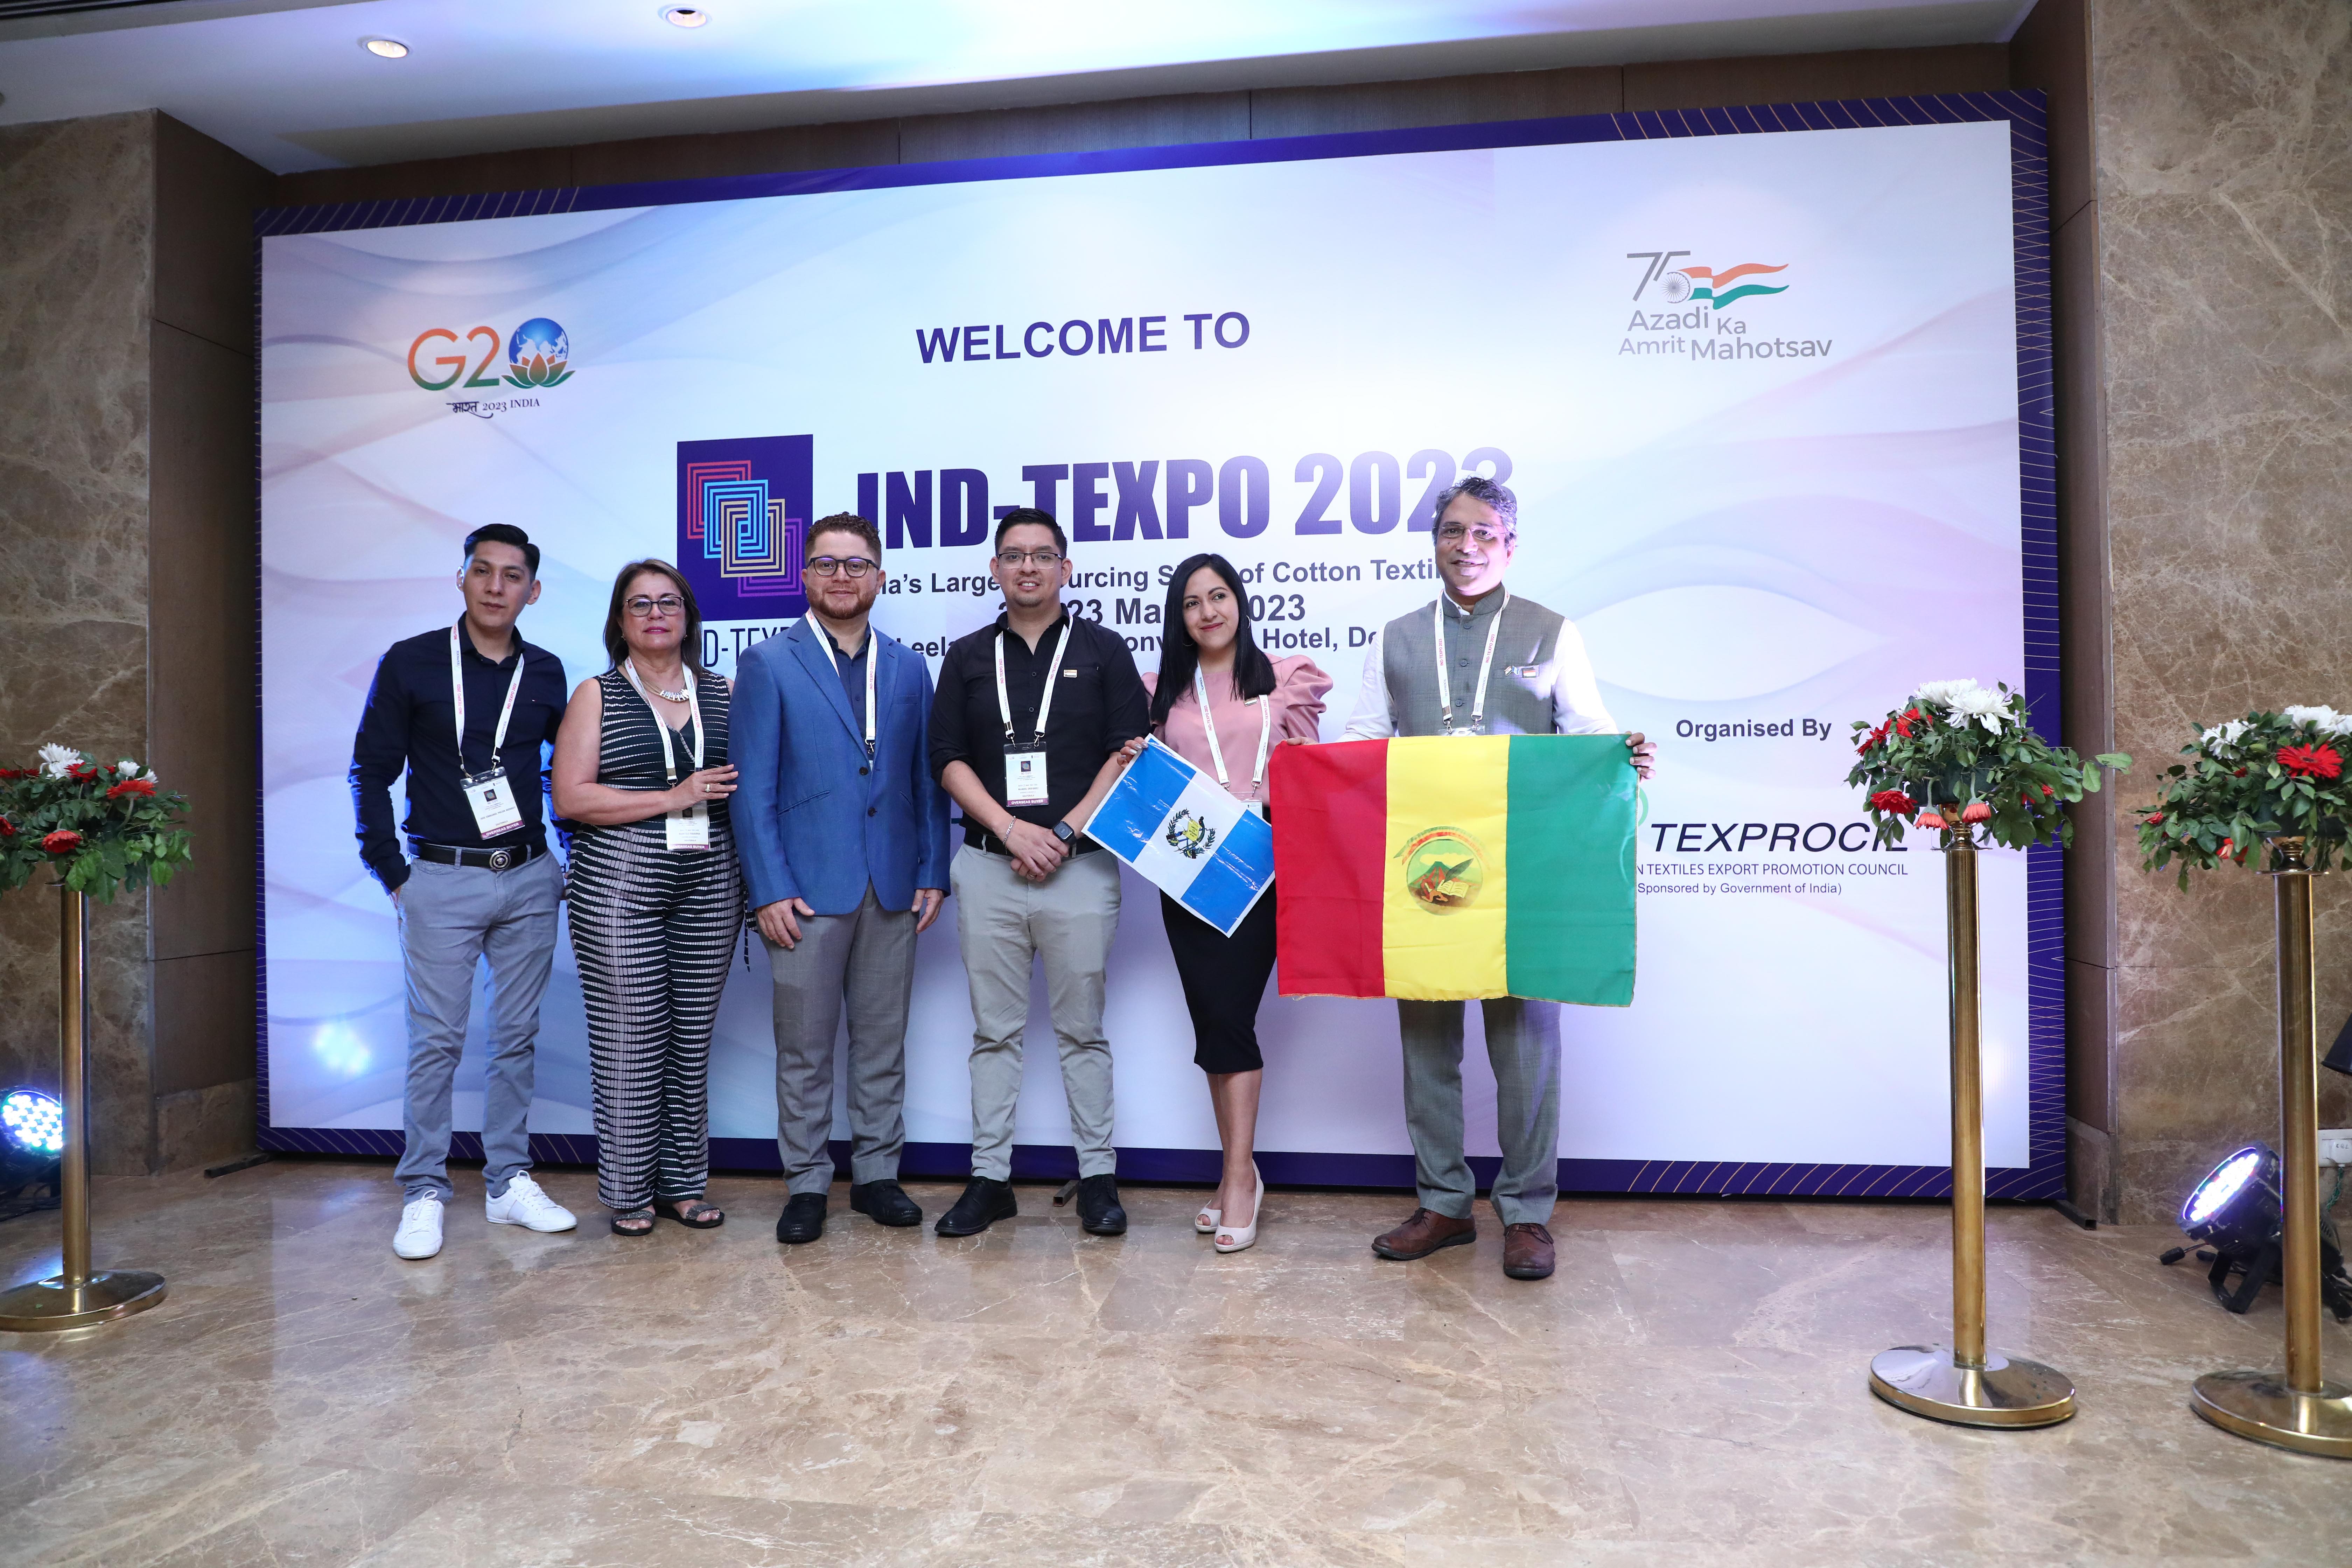 “Ind-Texpo”, Delhi from March 22-23, 2023